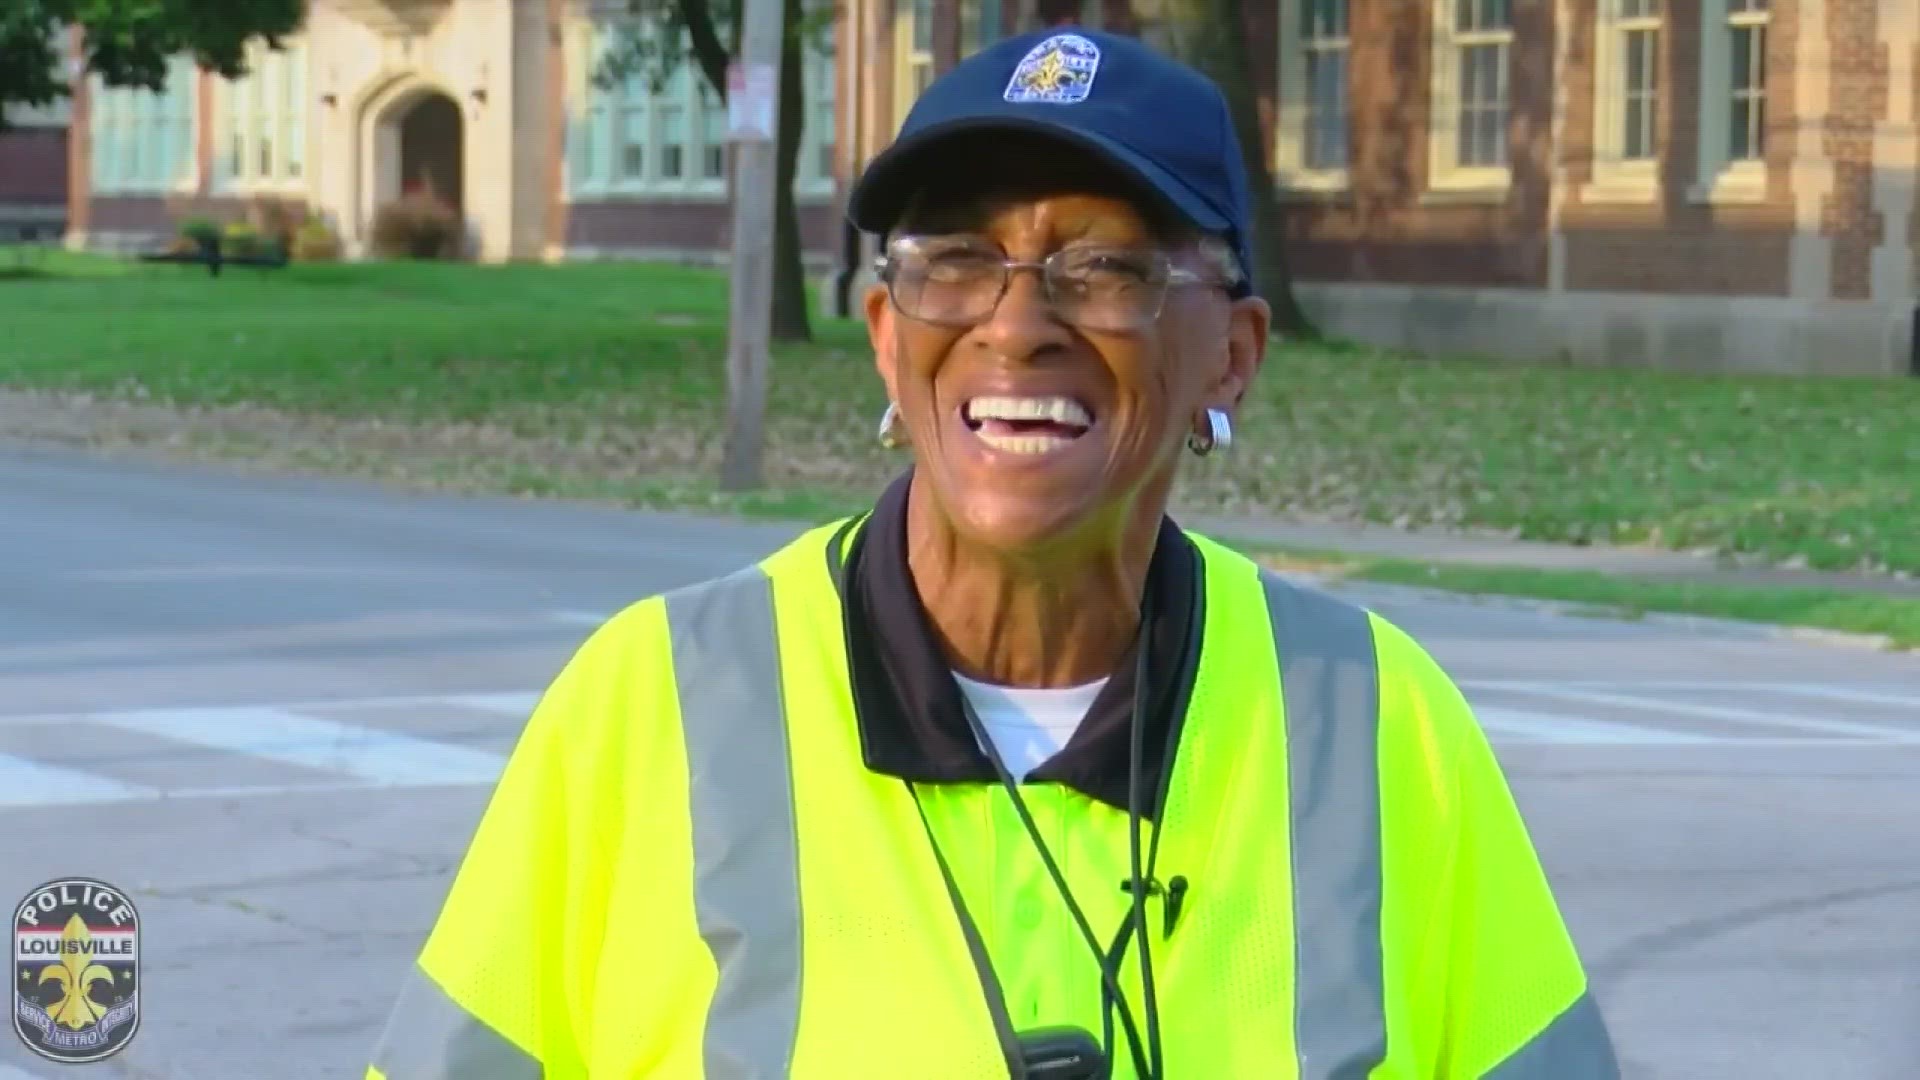 Ruth, 89, has dedicated decades of her life to protecting Louisville's kids. Now, Thursday will be her last day.